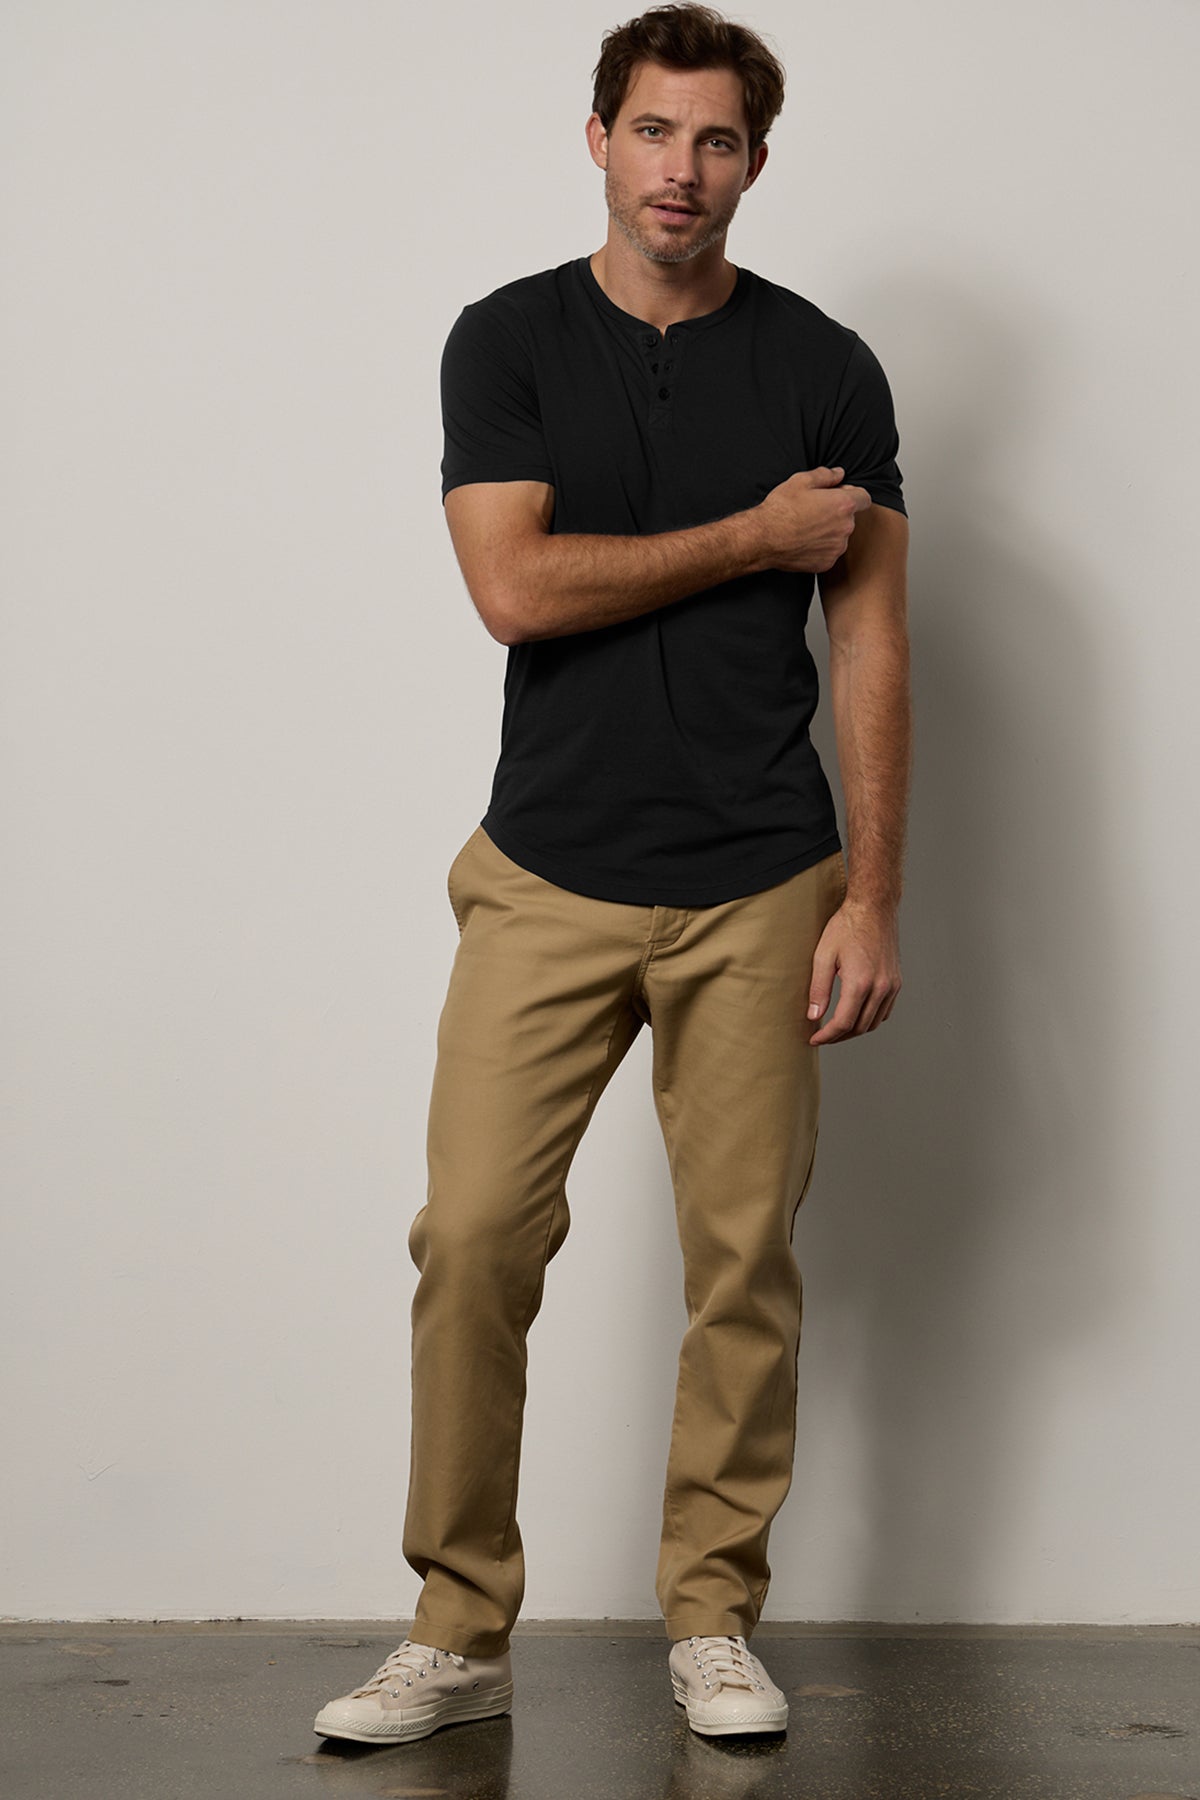   Man in black Fulton Henley and beige pants standing with one arm crossed over his chest, against a gray background. 